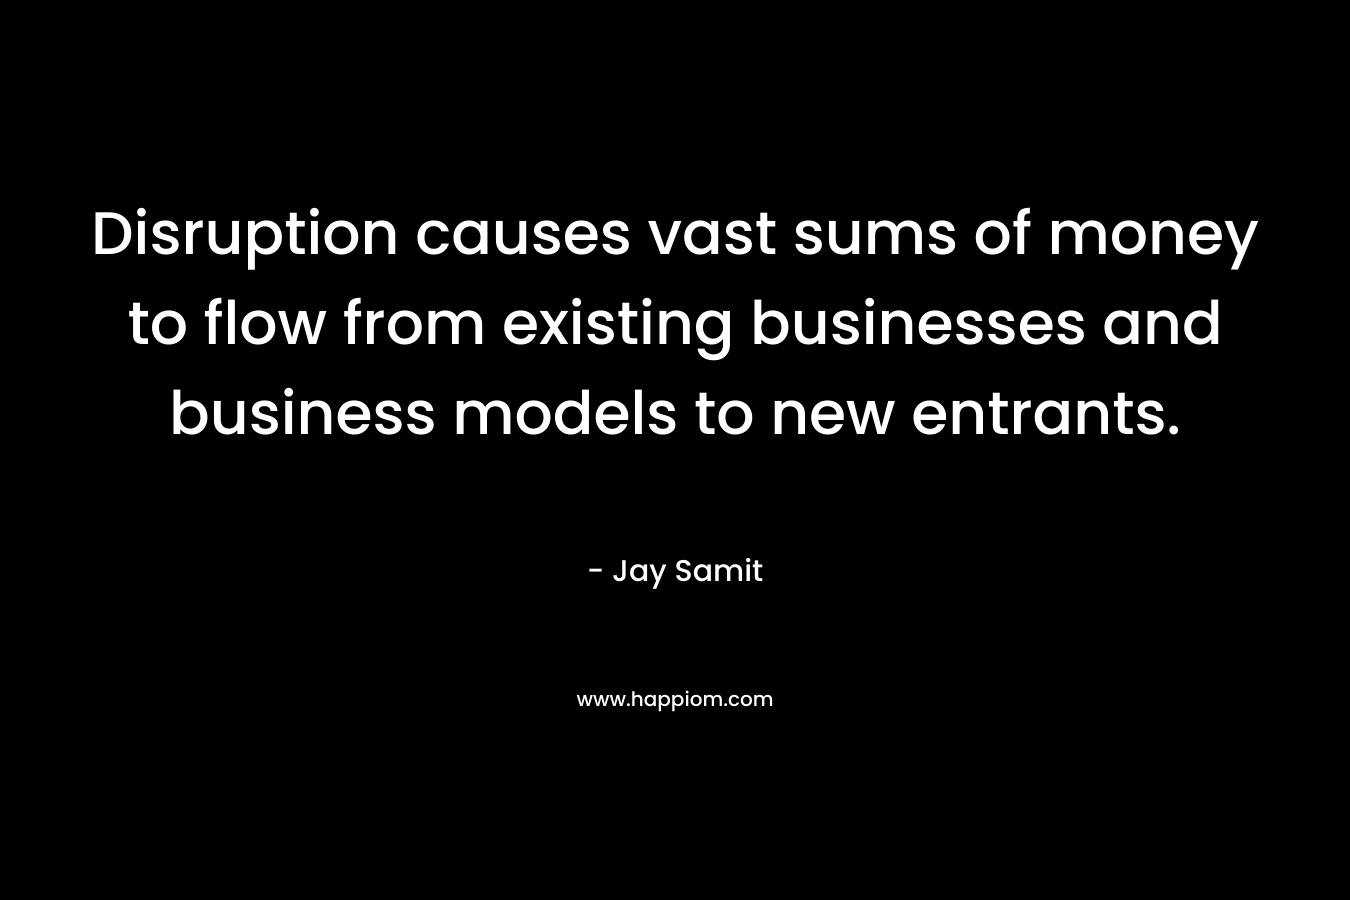 Disruption causes vast sums of money to flow from existing businesses and business models to new entrants. – Jay Samit